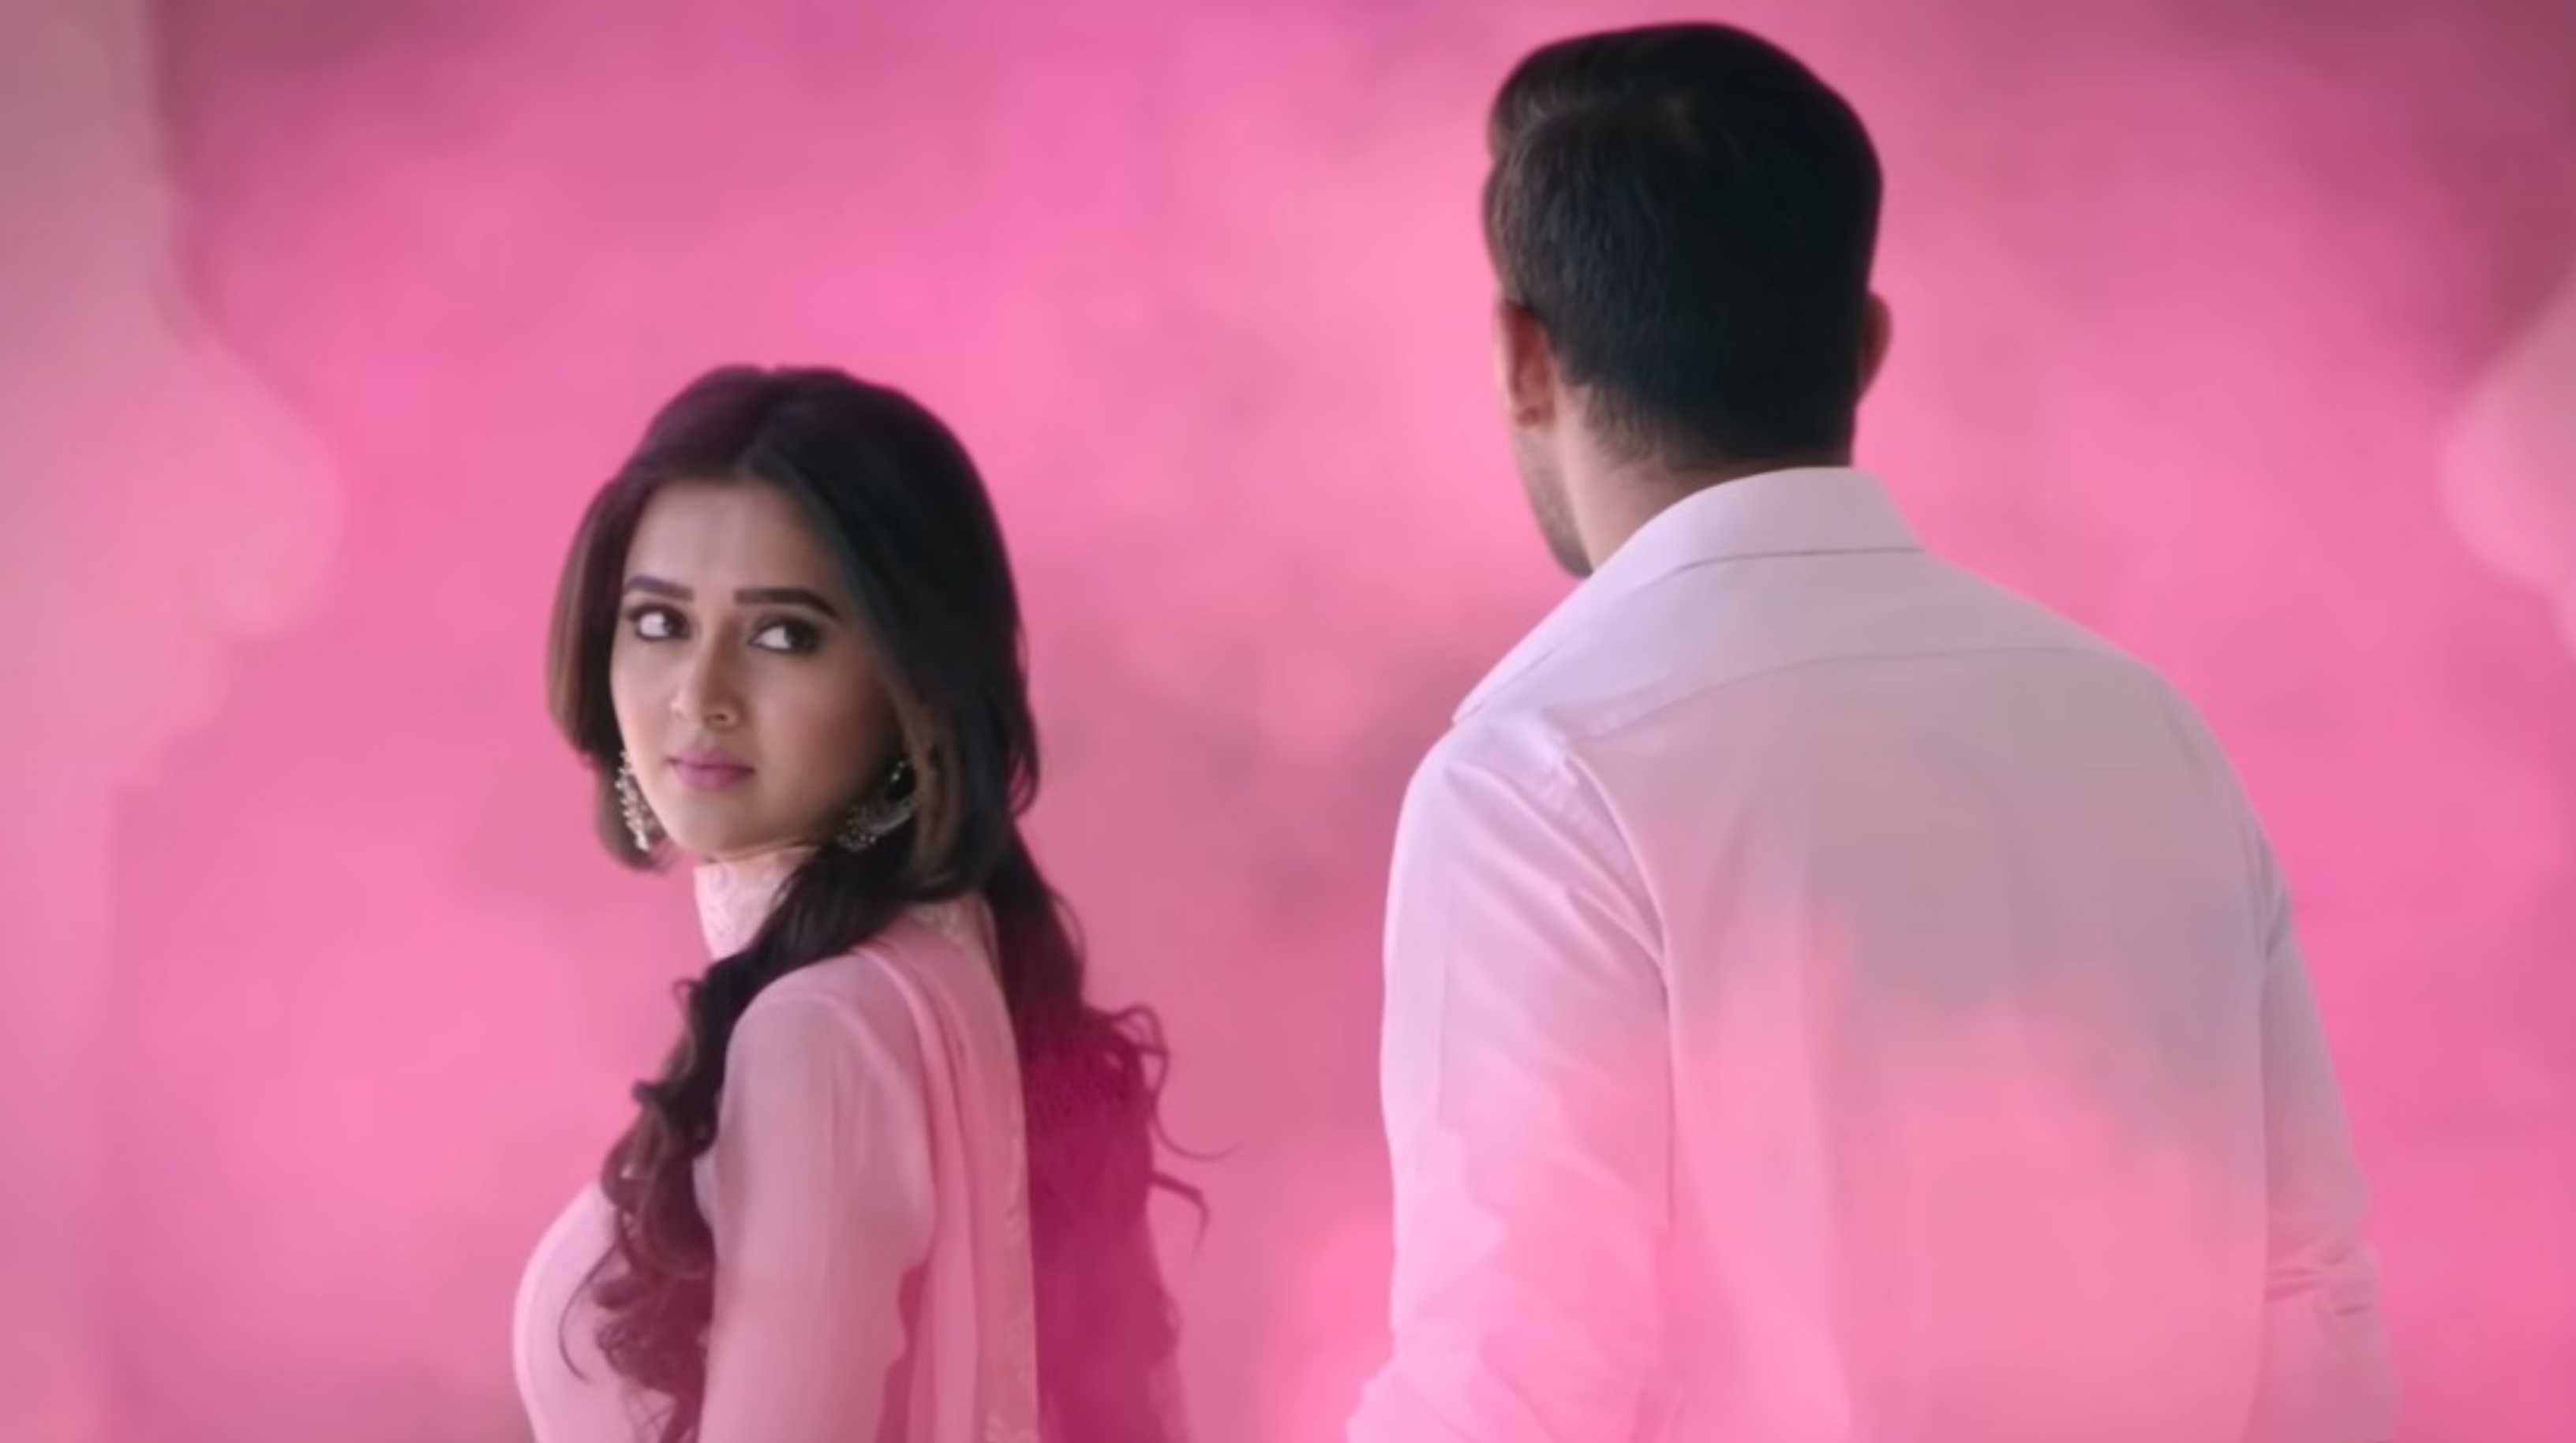 ‘Fairytale romance’: Teaser of Tejasswi & Karan’s track Rangbahara from School College Ani Life leaves fans wanting more